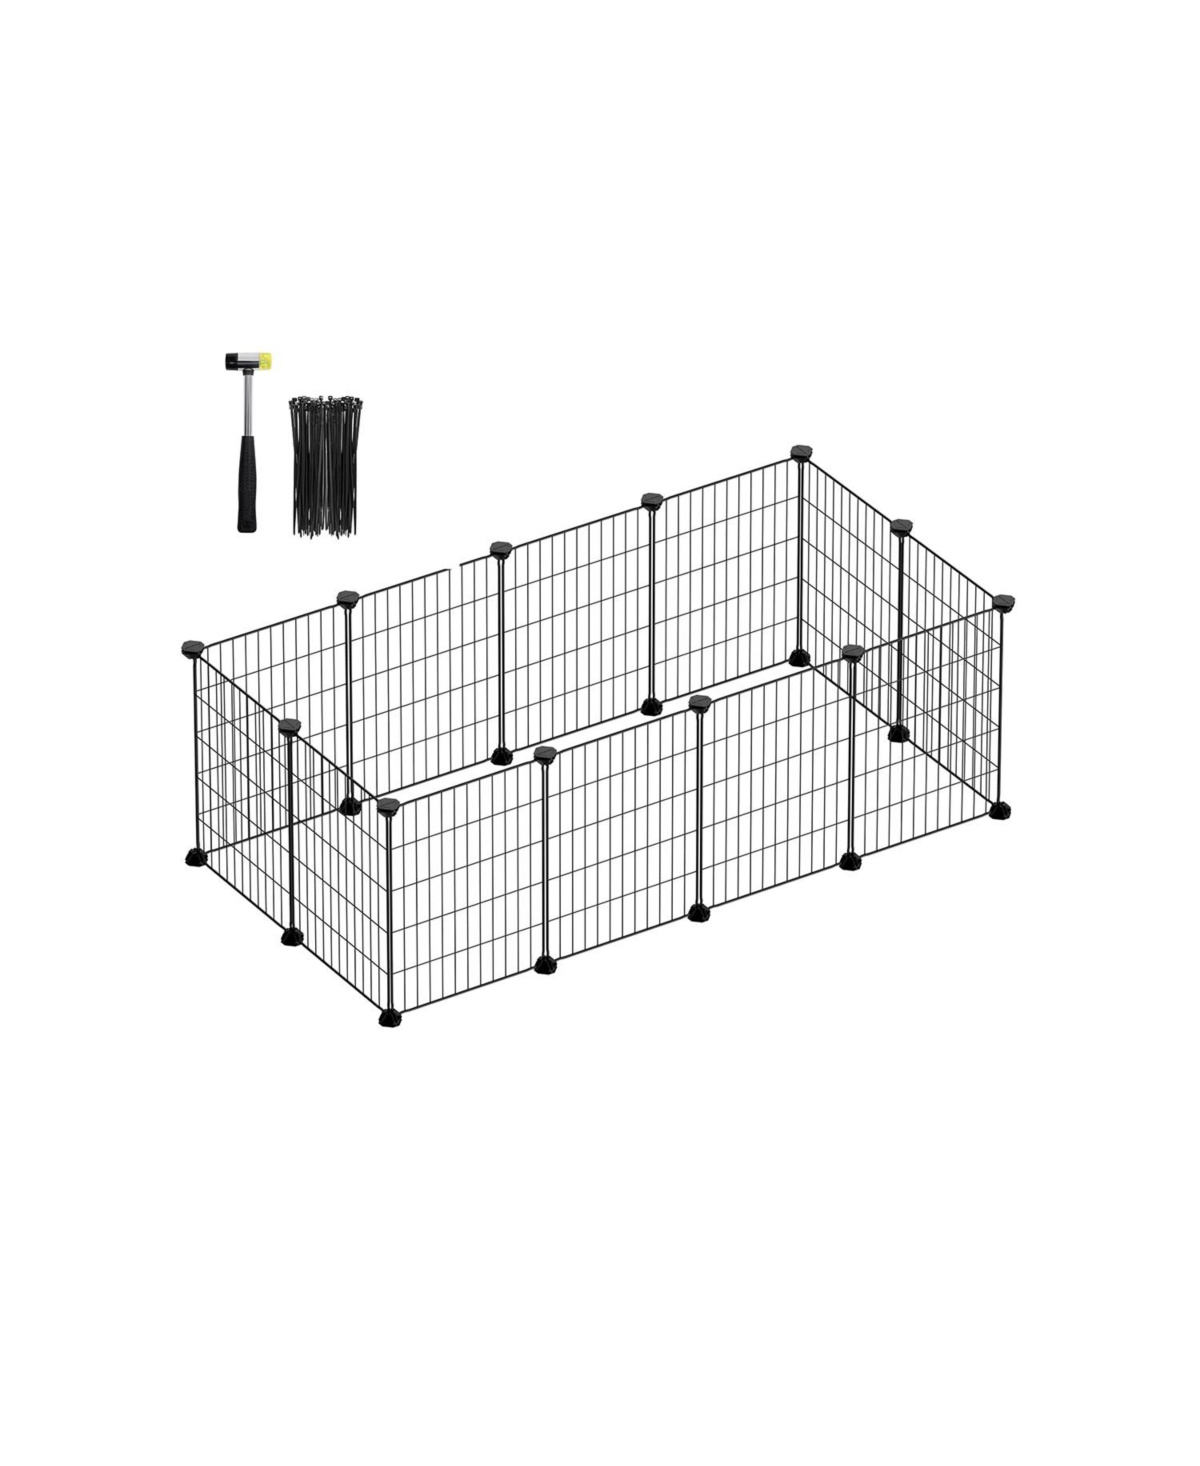 Pet Playpen, Small Animal Cage, Pet Fence with Cable Ties, Diy Metal Enclosure - White